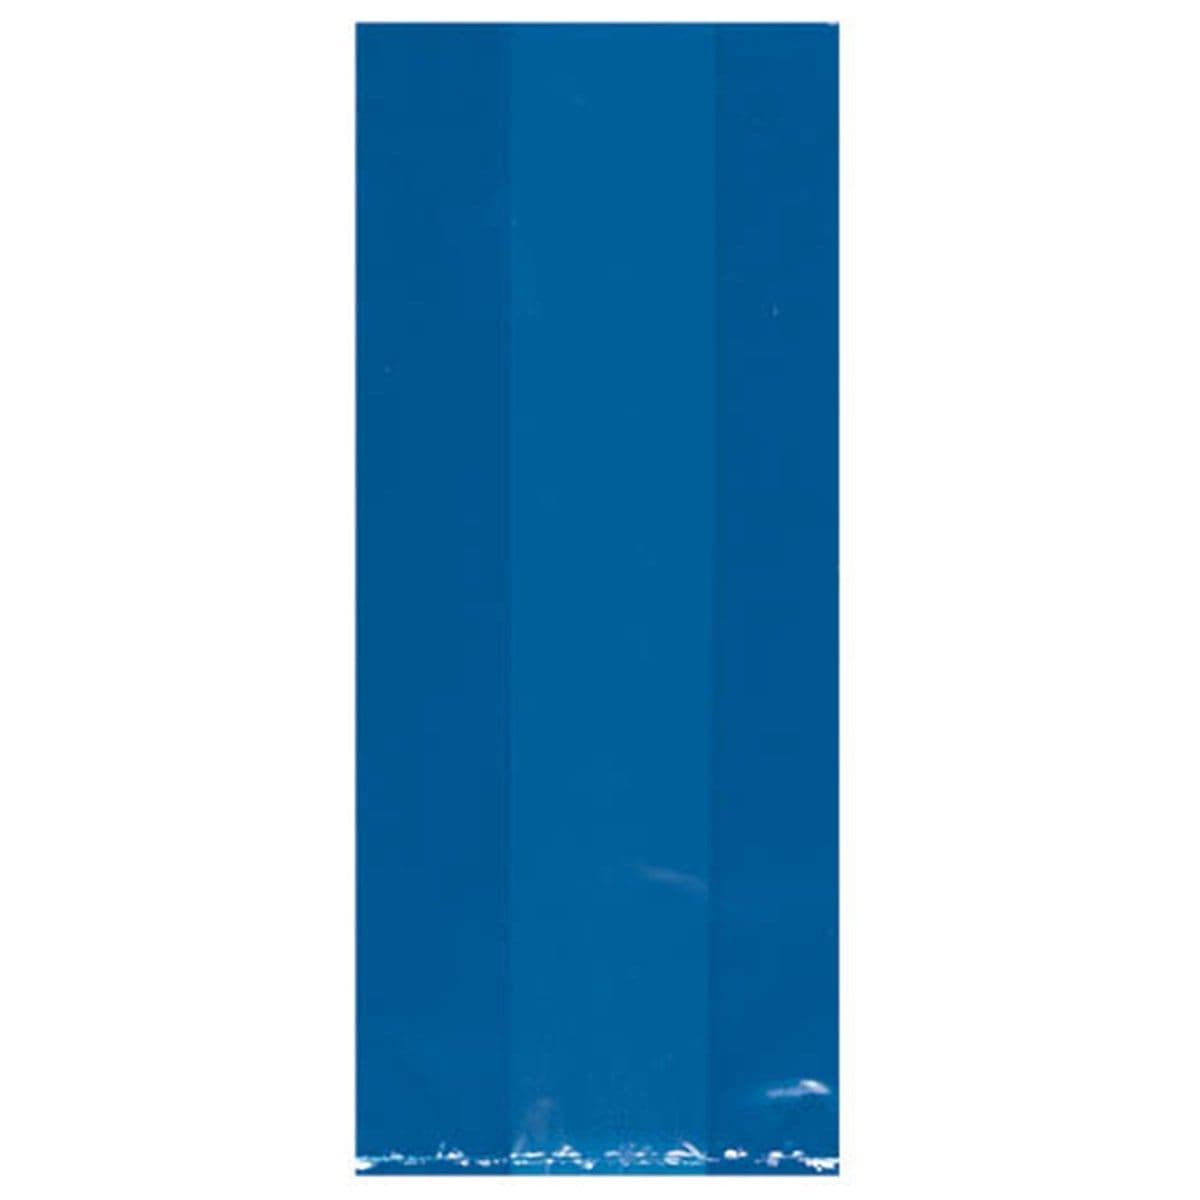 Buy Party Supplies Cello Bags - Royal Blue 9.5 x 4 x 2.25 25/pkg sold at Party Expert